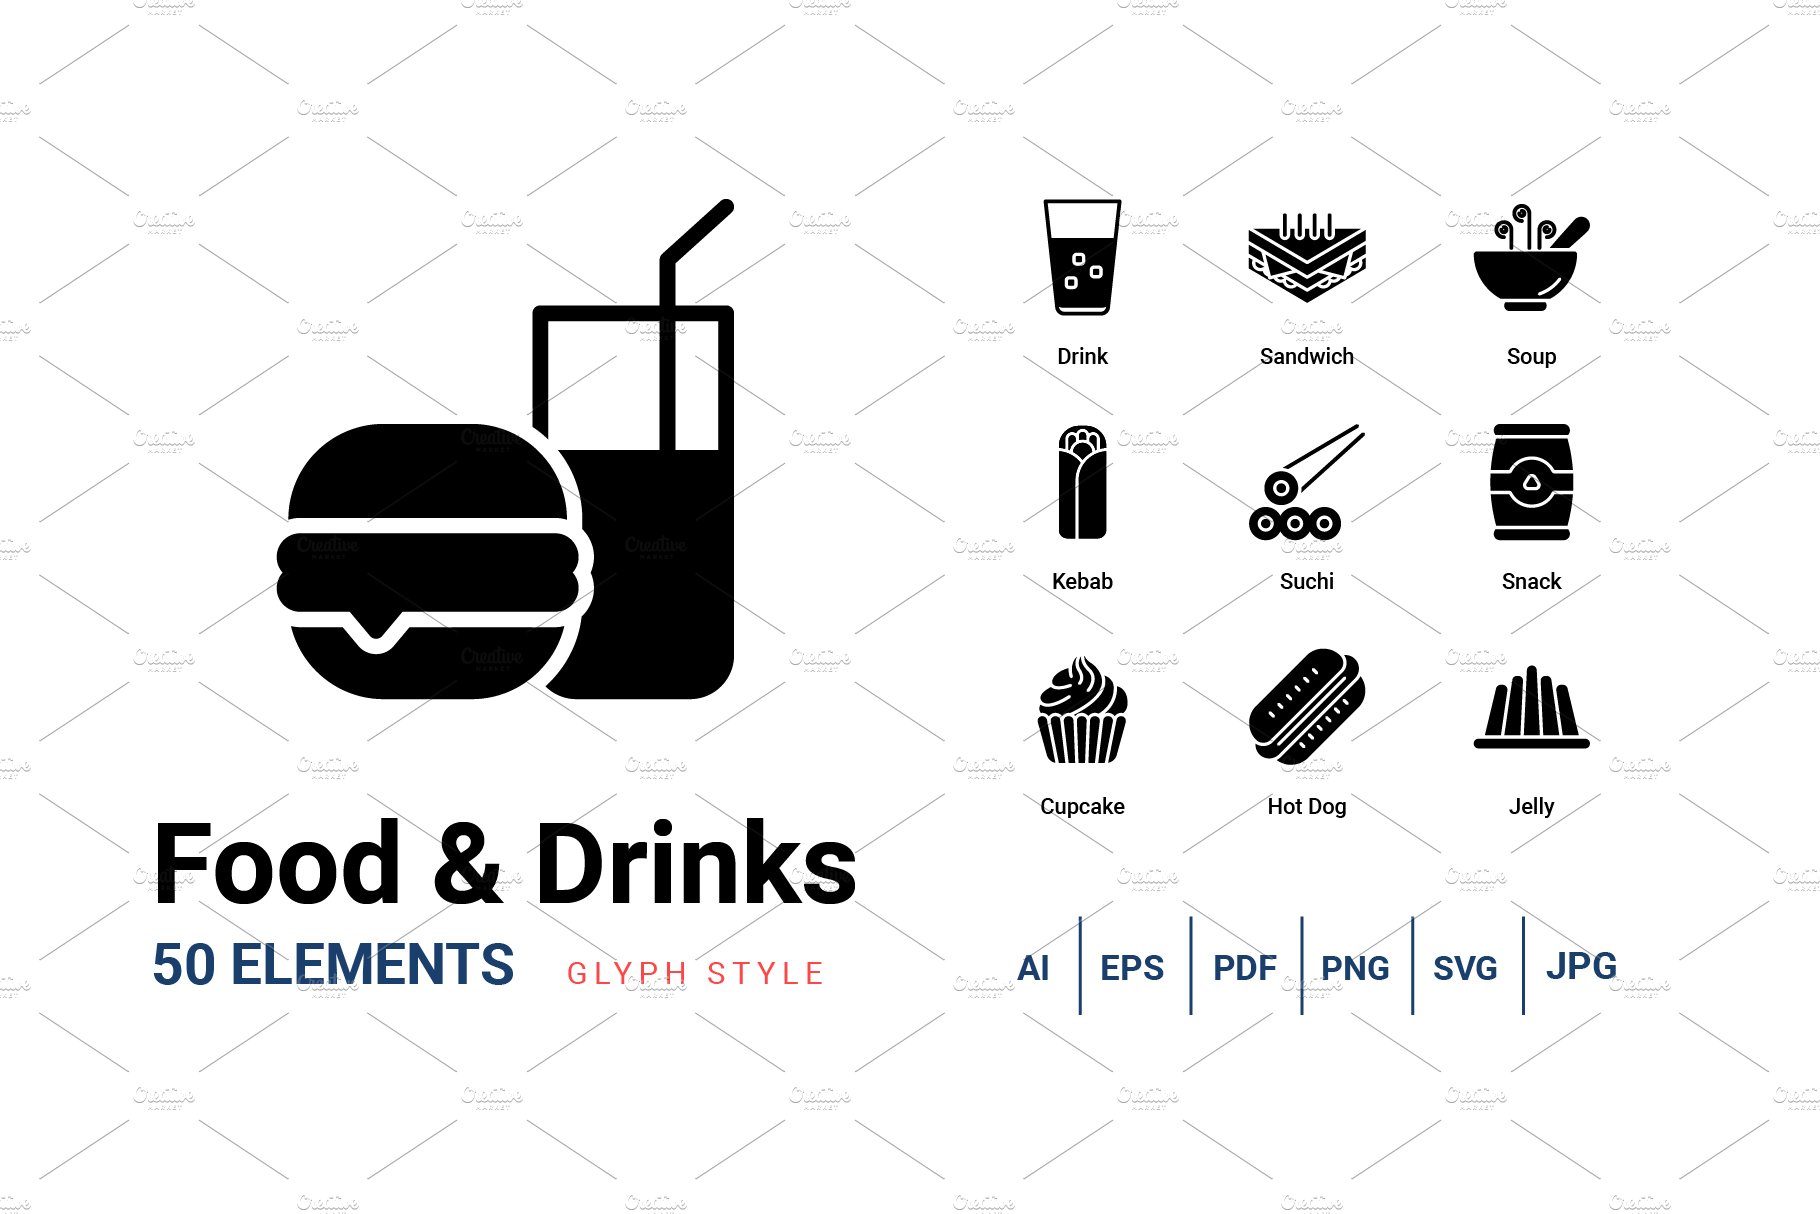 Food and Drinks Glyph icons cover image.